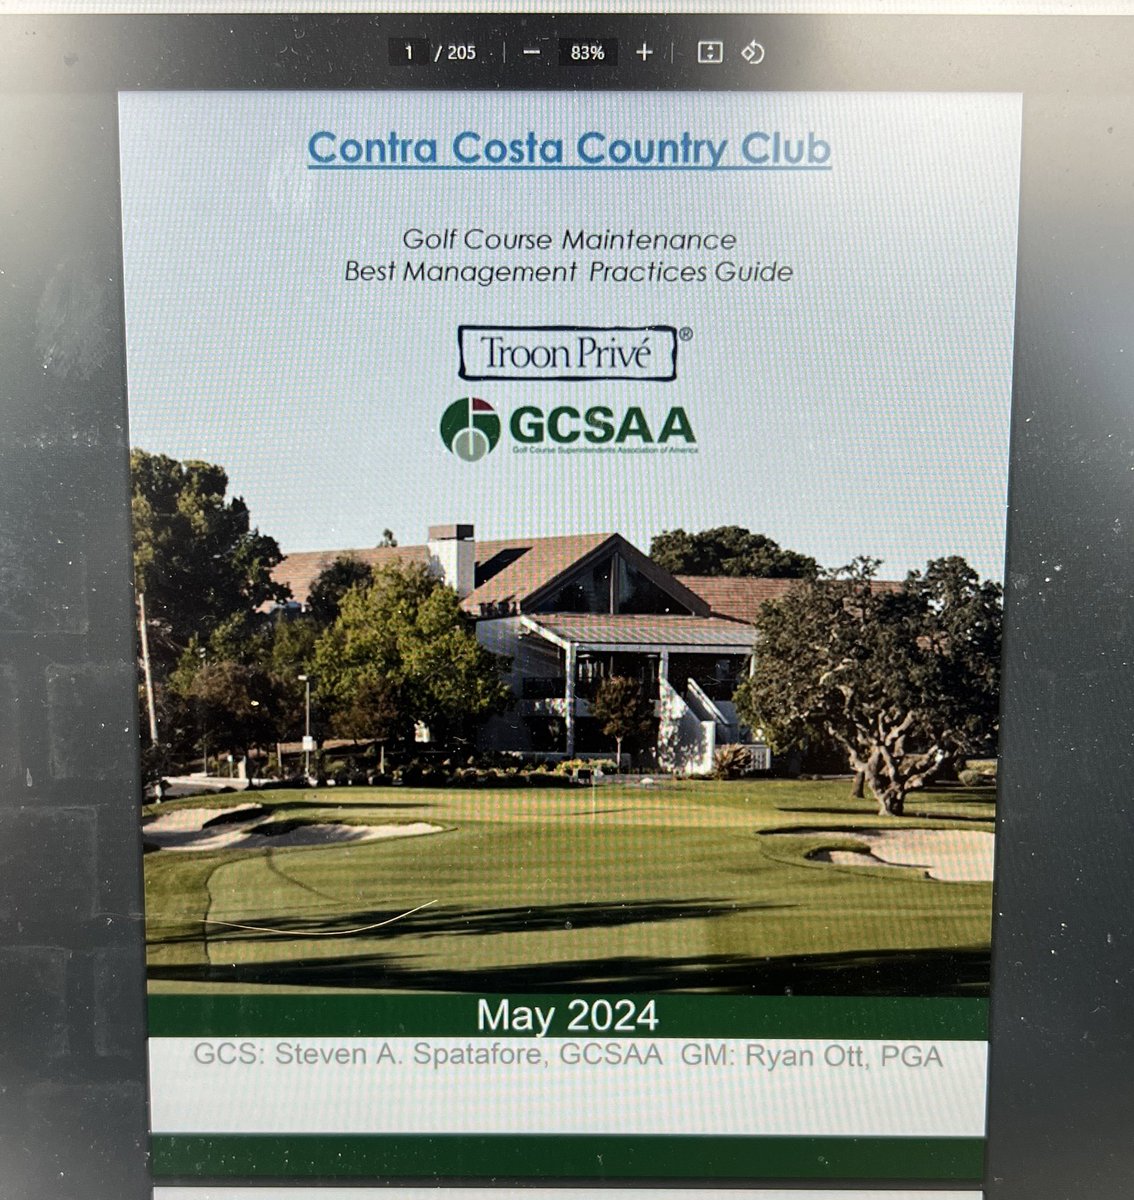 National Golf Day is coming up-spending a Sunday to keep working on the @contracostacc BMP Guide for GCM. In my mind this would be more difficult. Thanks to all the folks at @GCSAA and superintendents that built these user-friendly template guides. #TroonAgronomy